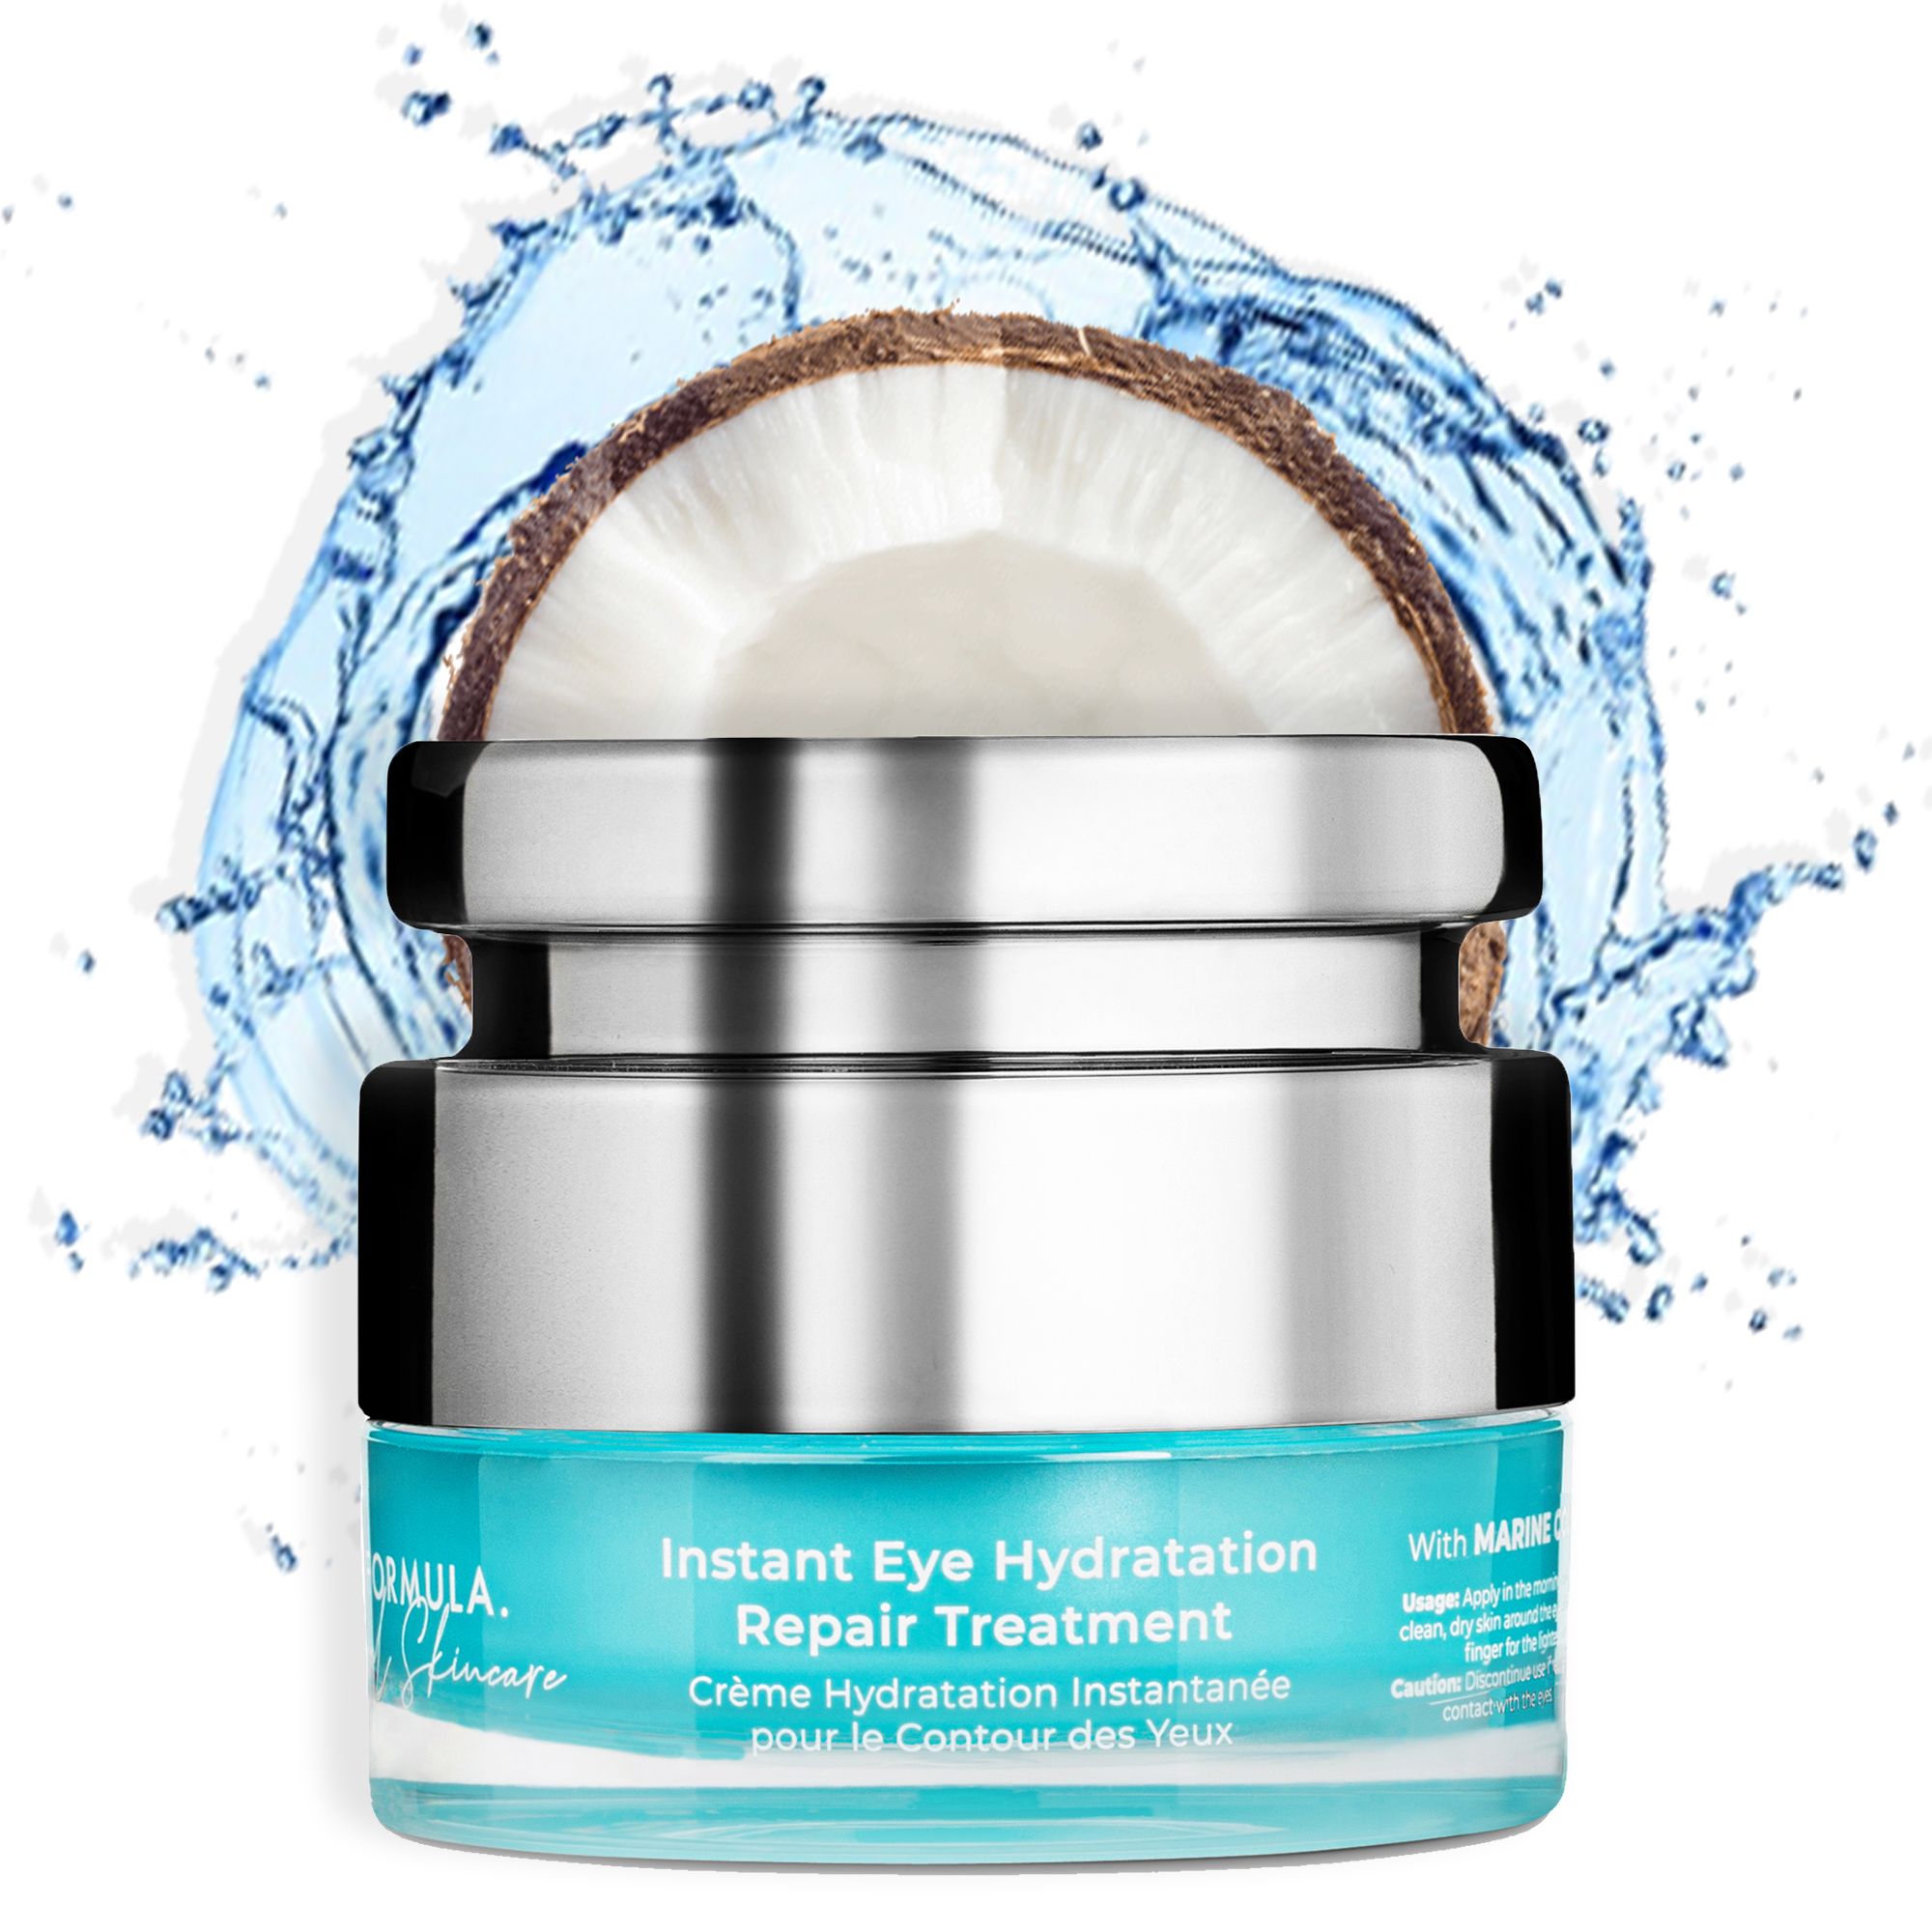 Luminous Instant Eye Hydration Repair formulated to dramatically define eye vitality. This super-enriched infusion of Marine Collagen, Soluble Collagen and mineral rich marine water. 
Visibly restores eye hydration levels, smooths the delicate eye area, for a renewed and visibly radiant effect.

Key Ingredients:
- Marine collagen amino acids intensely hydrate, provide super-enriched suppleness and boost the building blocks which maintain the skin.
- Soluble collagen infuses with natural moisture into the skin, defining texture for a more radiant, youthful appearance.
- Mineral rich marine water enhances radiance and refines the delicate eye area.

Usage:
Apply a pea sized amount on ring fingers, delicately tapping around the orbital bone, morning and evening after applying your serum or ampoule. 

100% Cruelty Free